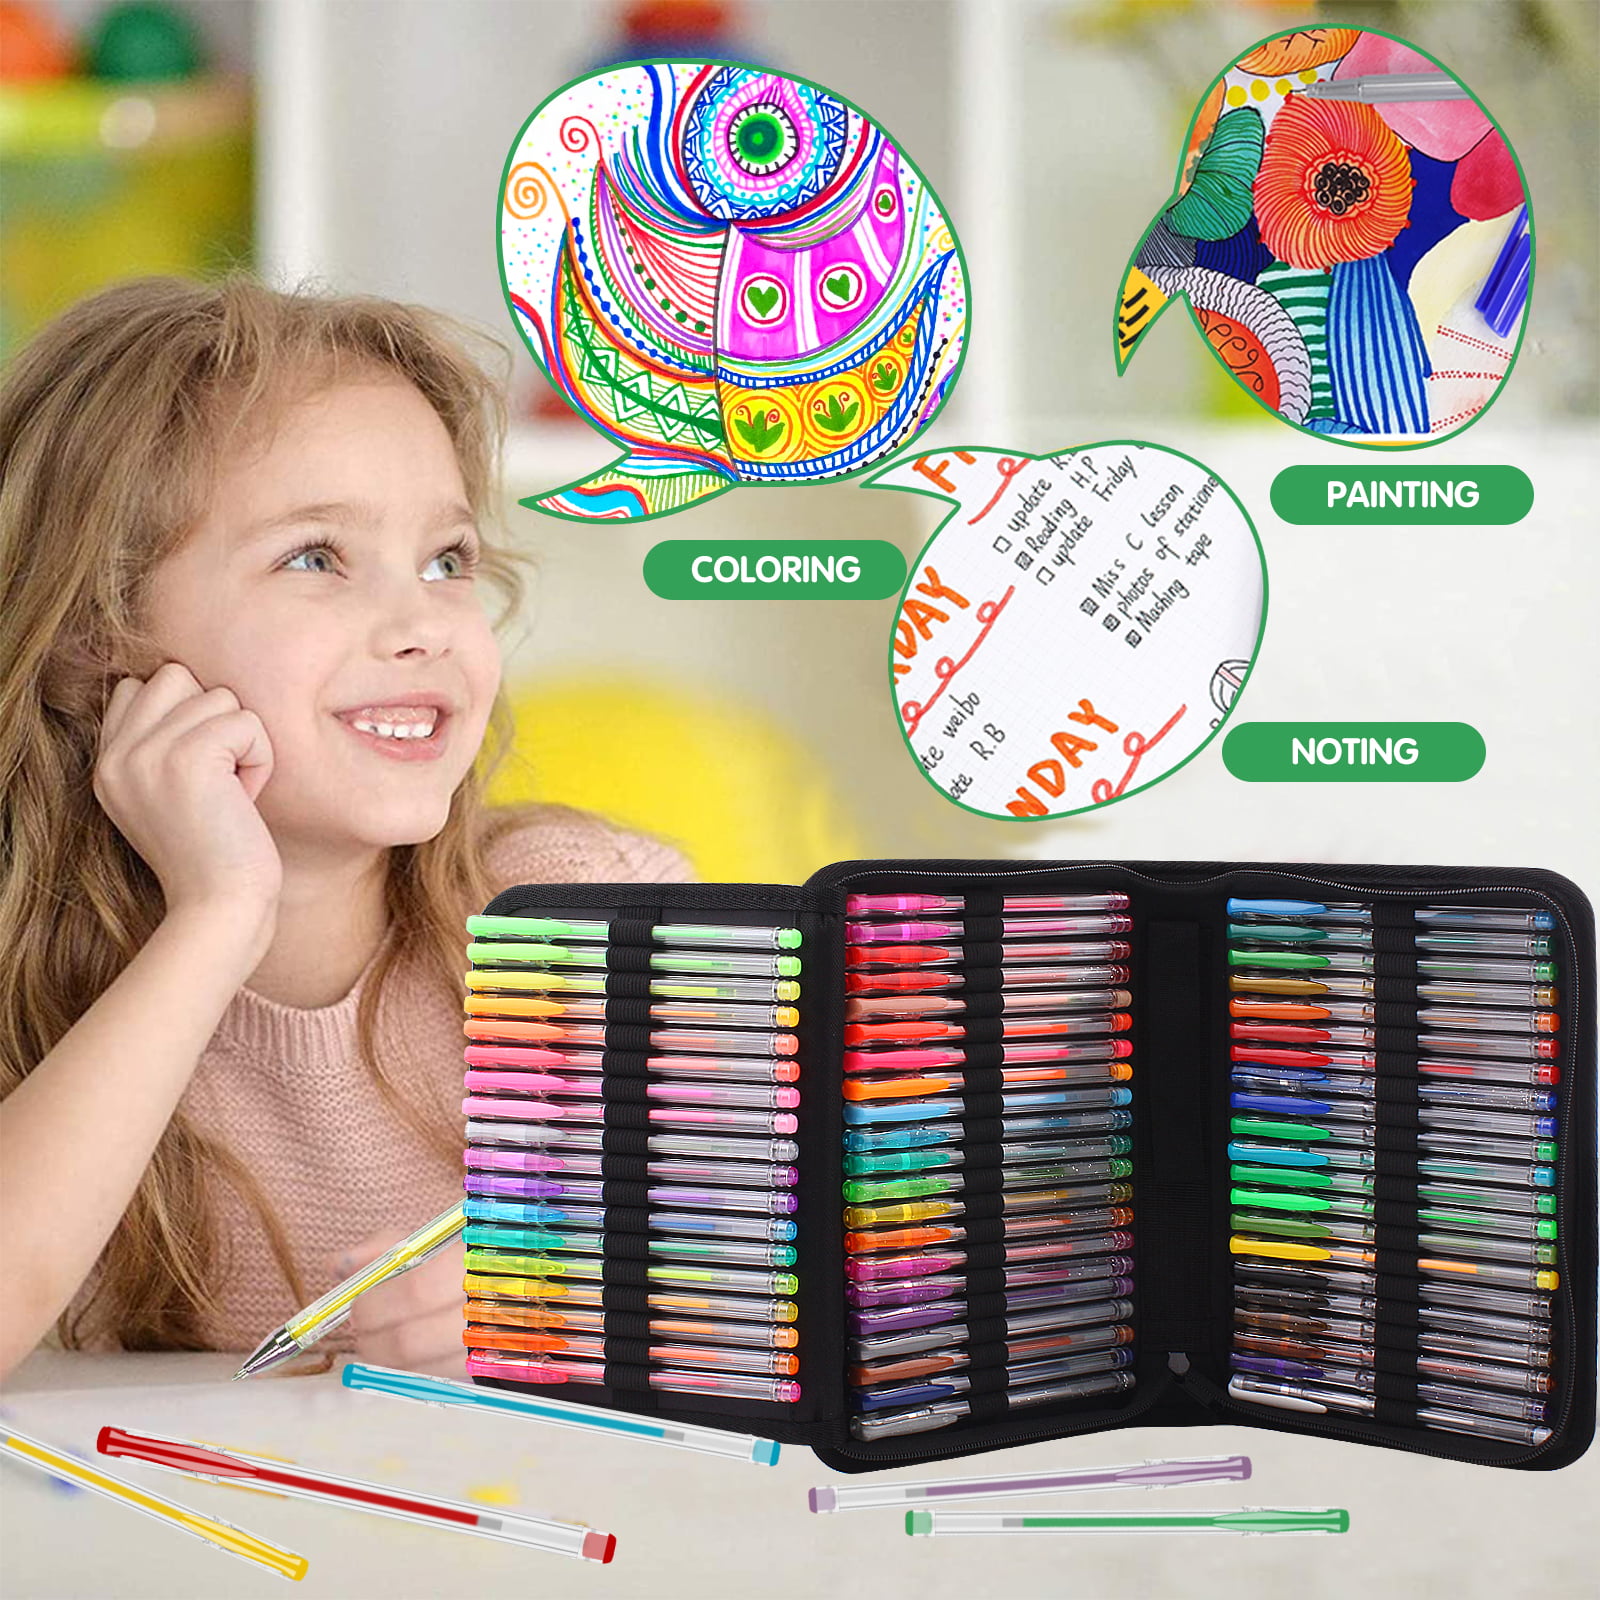 GOTIDEAL Gel Pens Set for Adult Coloring Books, 160pcs 80 Gel pens and 80  Refills with Travel Case, Colored Markers Great for Kids Doodling